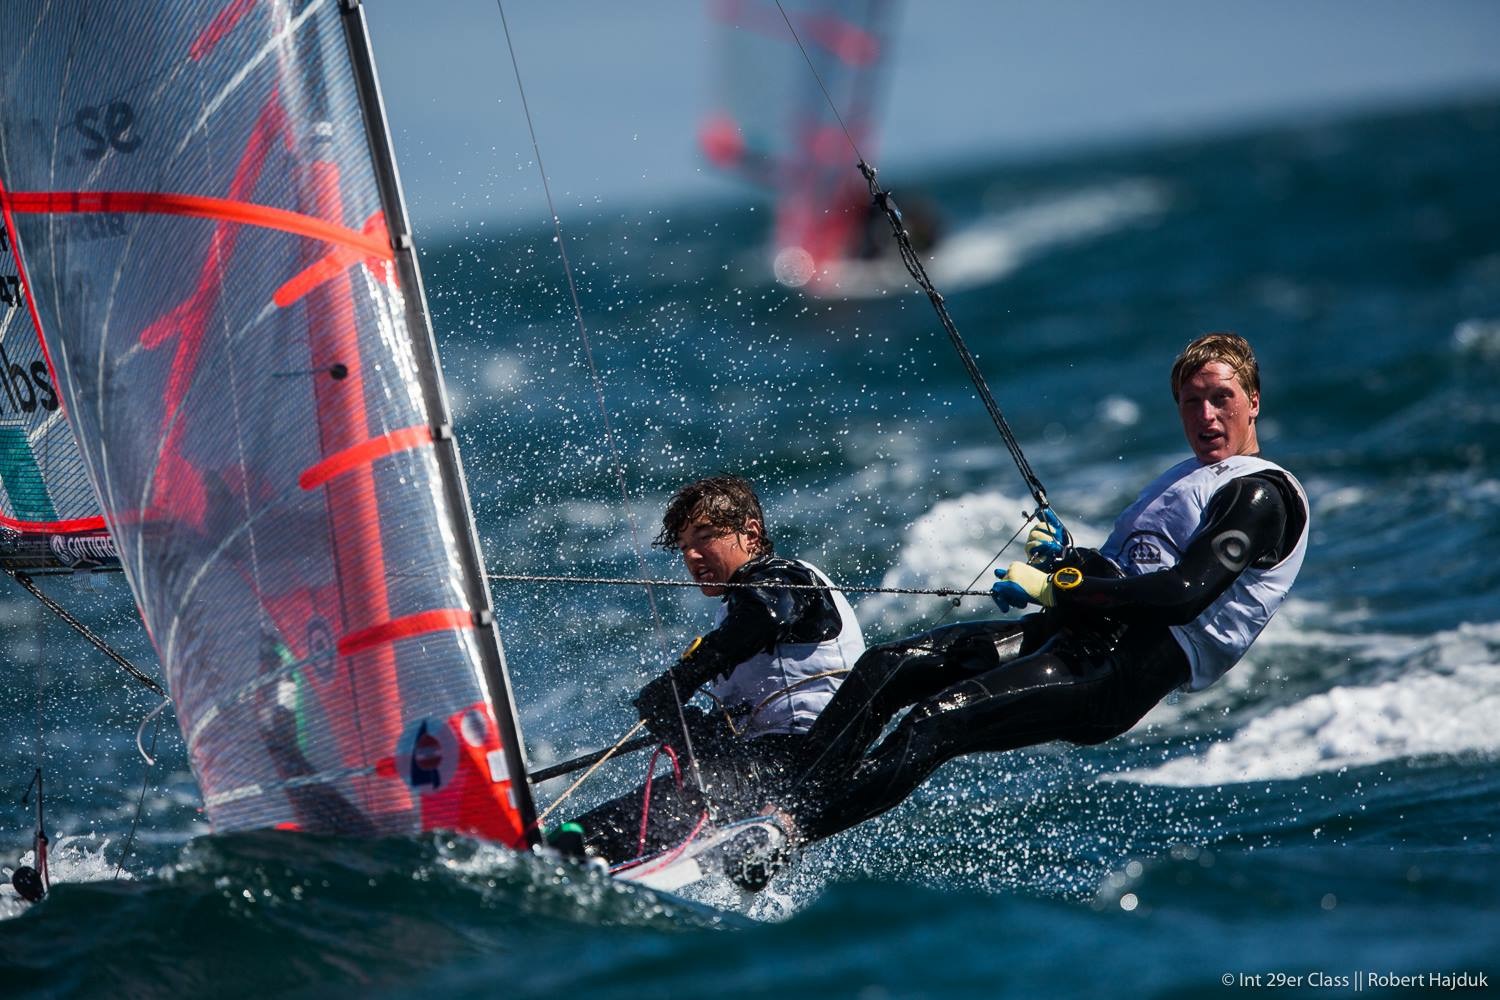 29er Worlds-15, 5th place